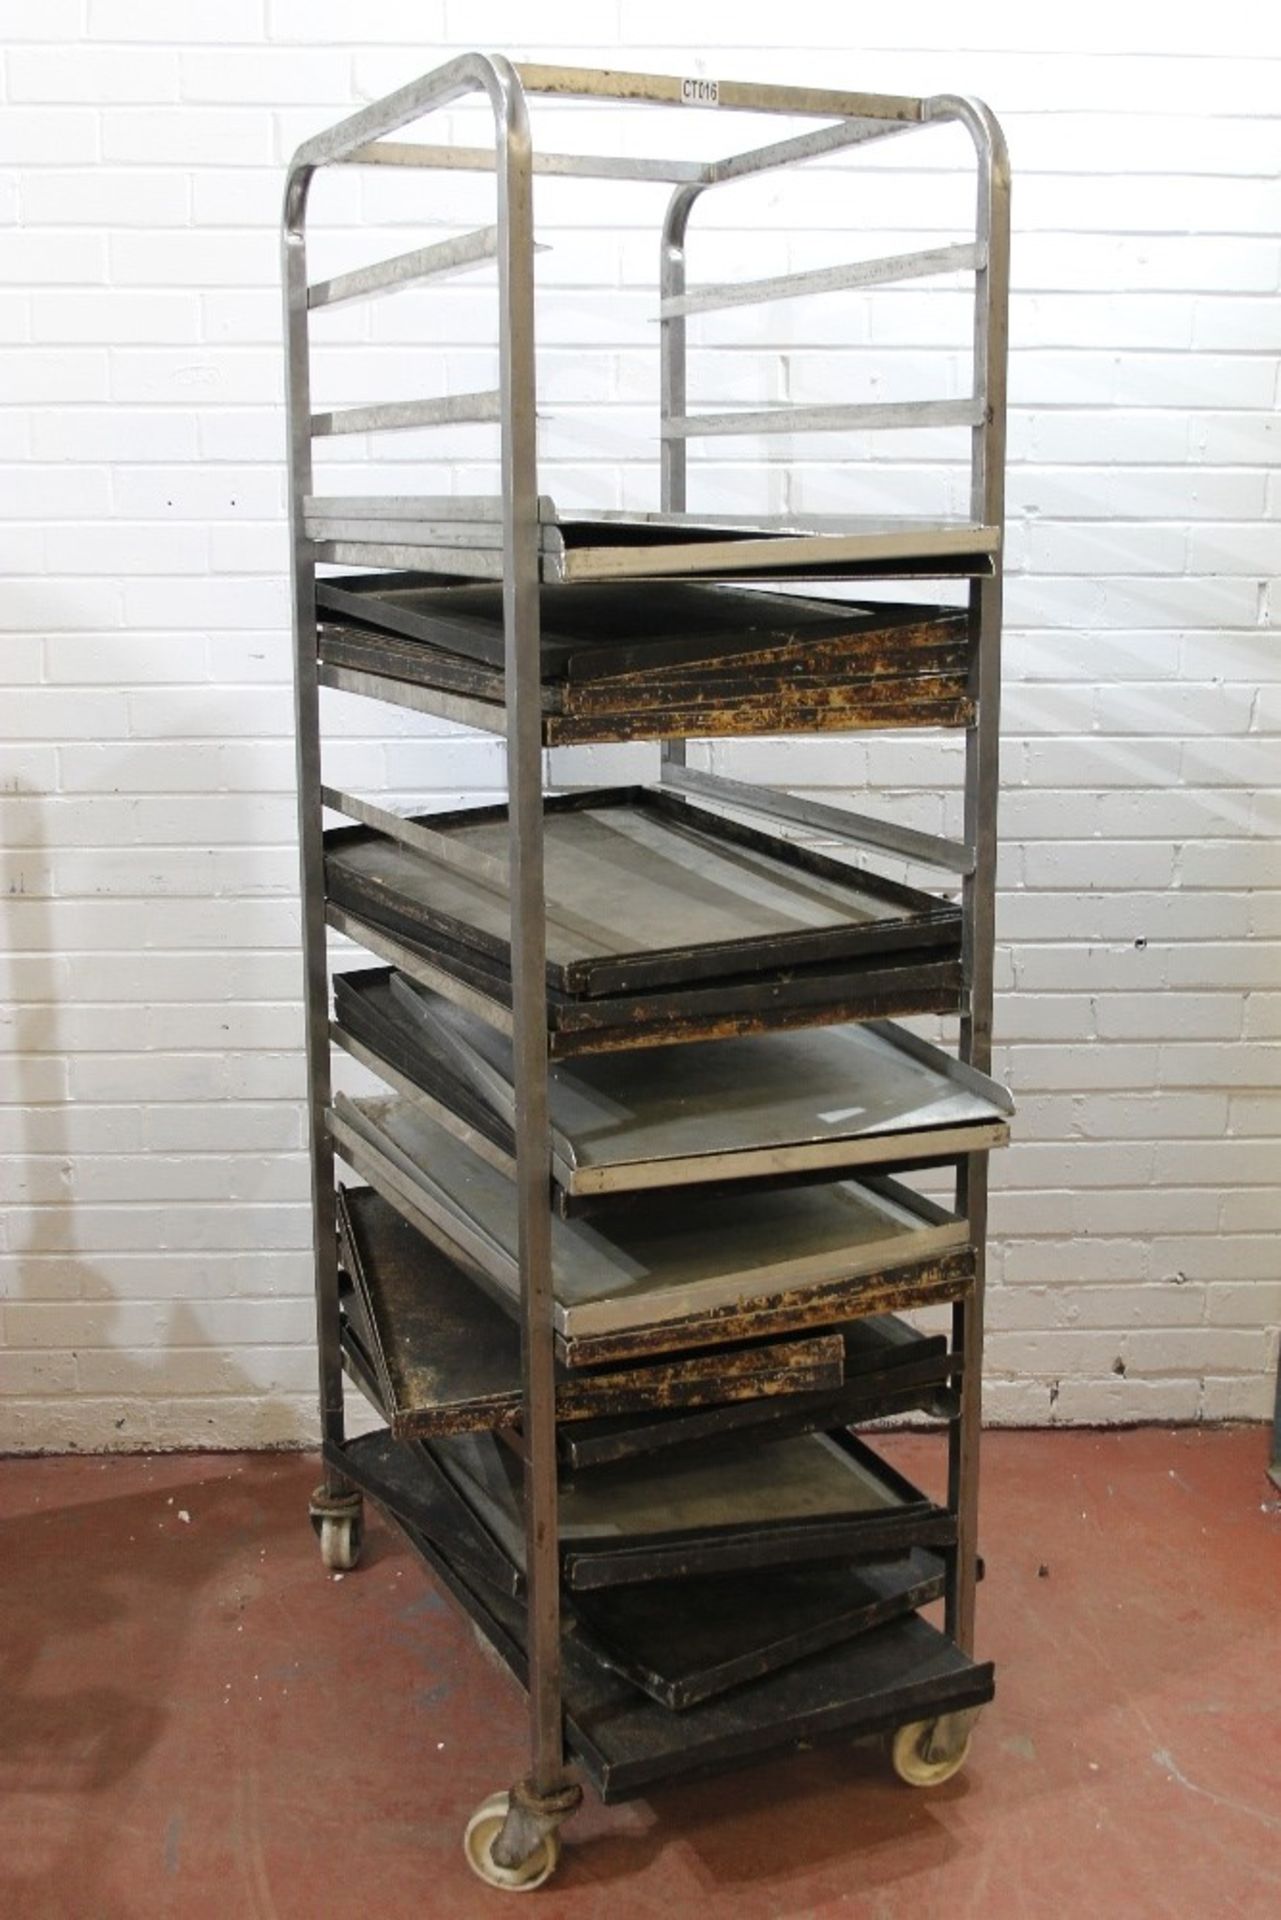 Bakers Rack with 10 Runners to hold 30” x 18” Baking Trays + 37 Baking Trays – NO VAT